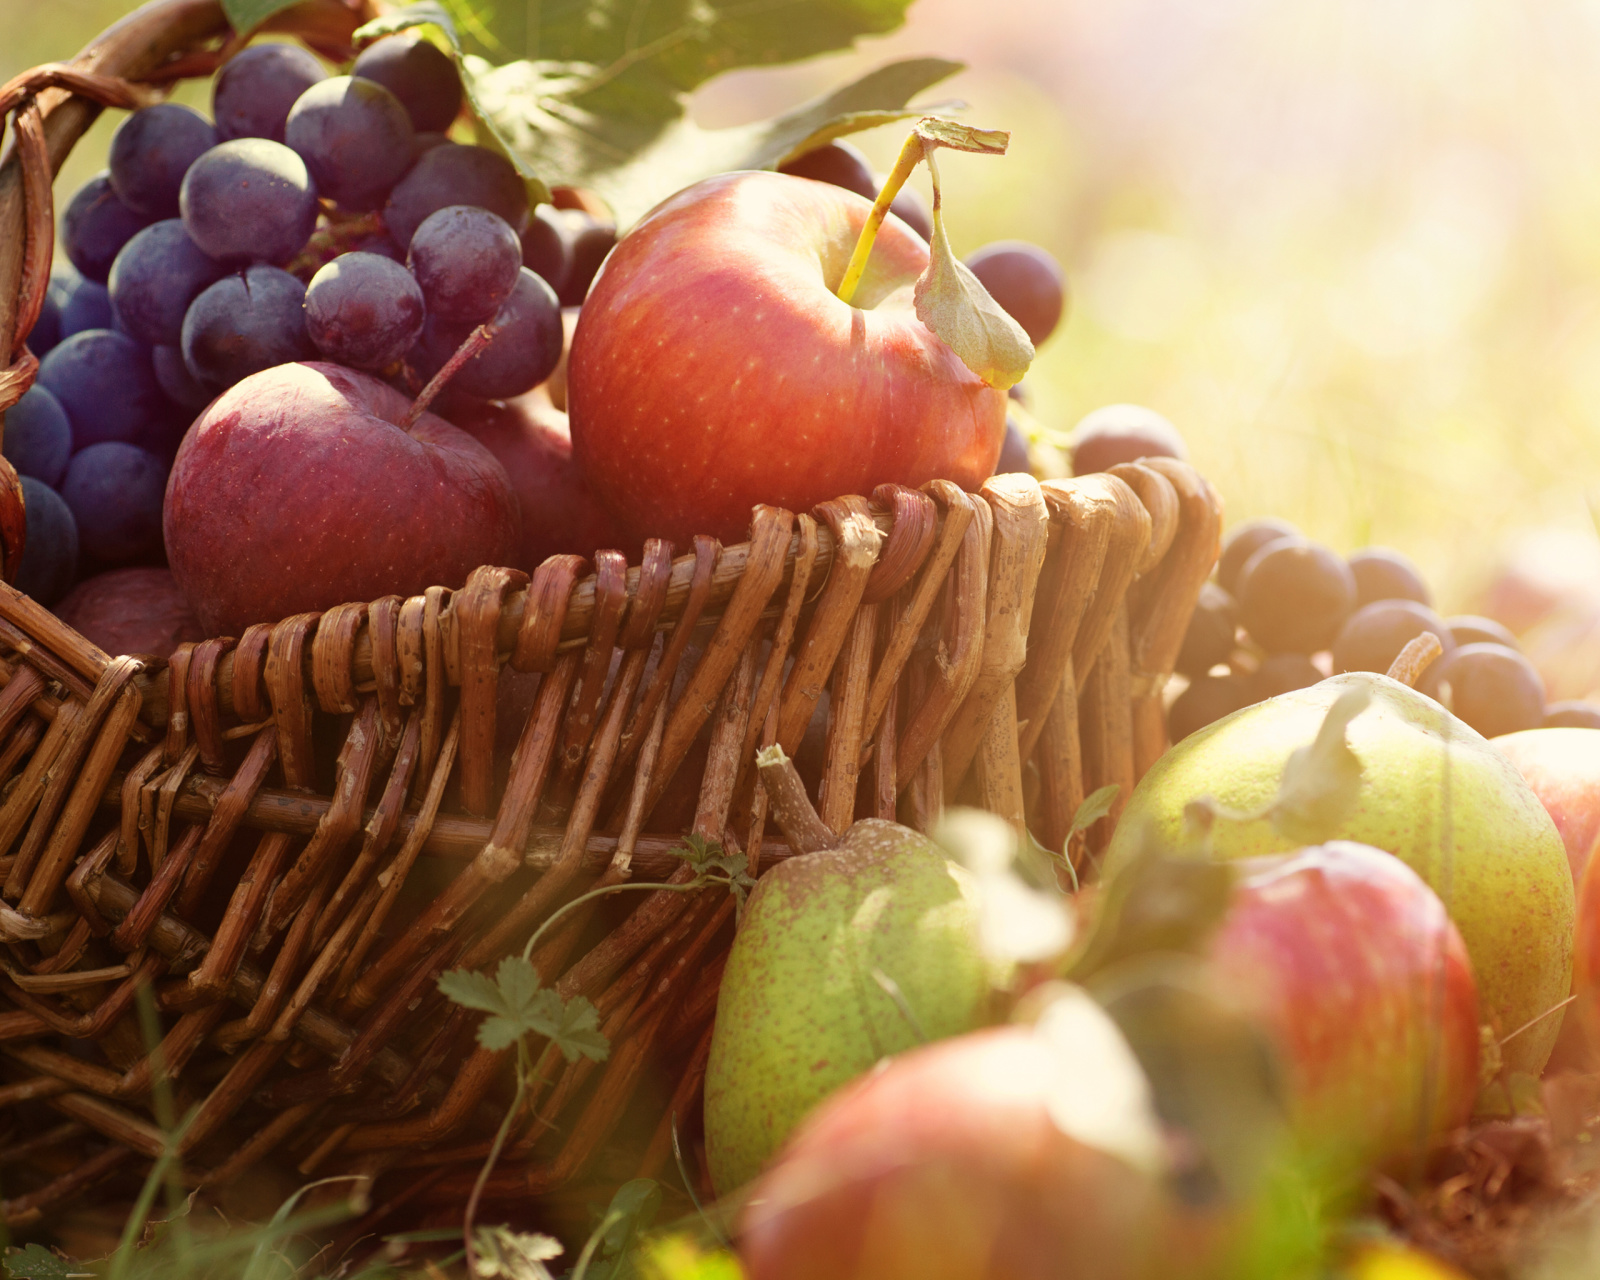 Apples and Grapes wallpaper 1600x1280